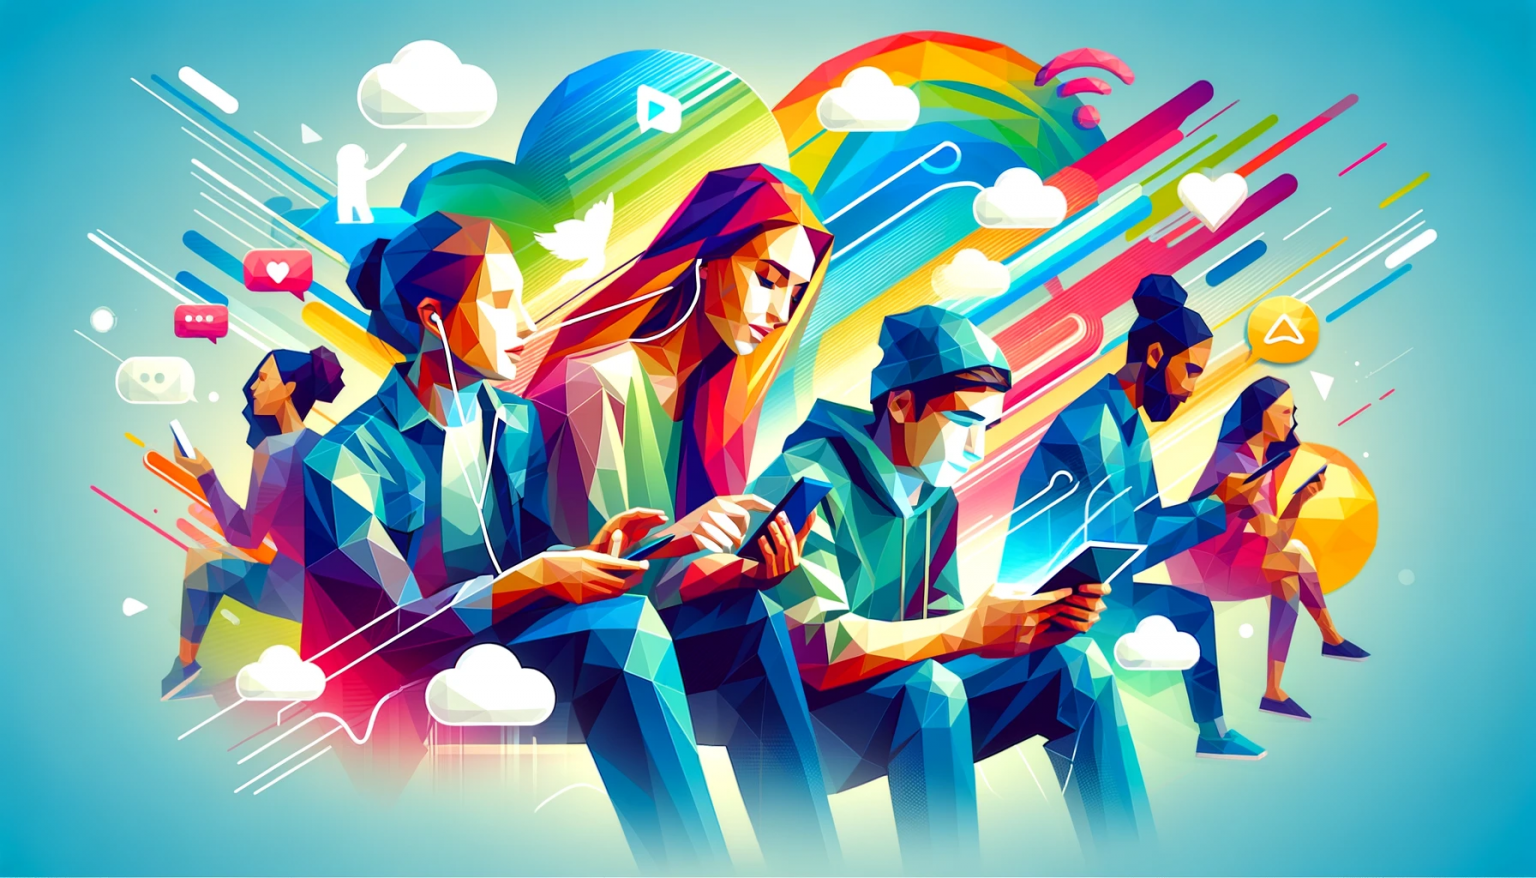 DALL·E 2024 01 10 13.45.04 An Image Of Two To Three Gen Z Individuals Engaging With Technology Or In A Social Setting Depicted In A Vibrant Low Poly Art Style. The Individuals  1536x878 